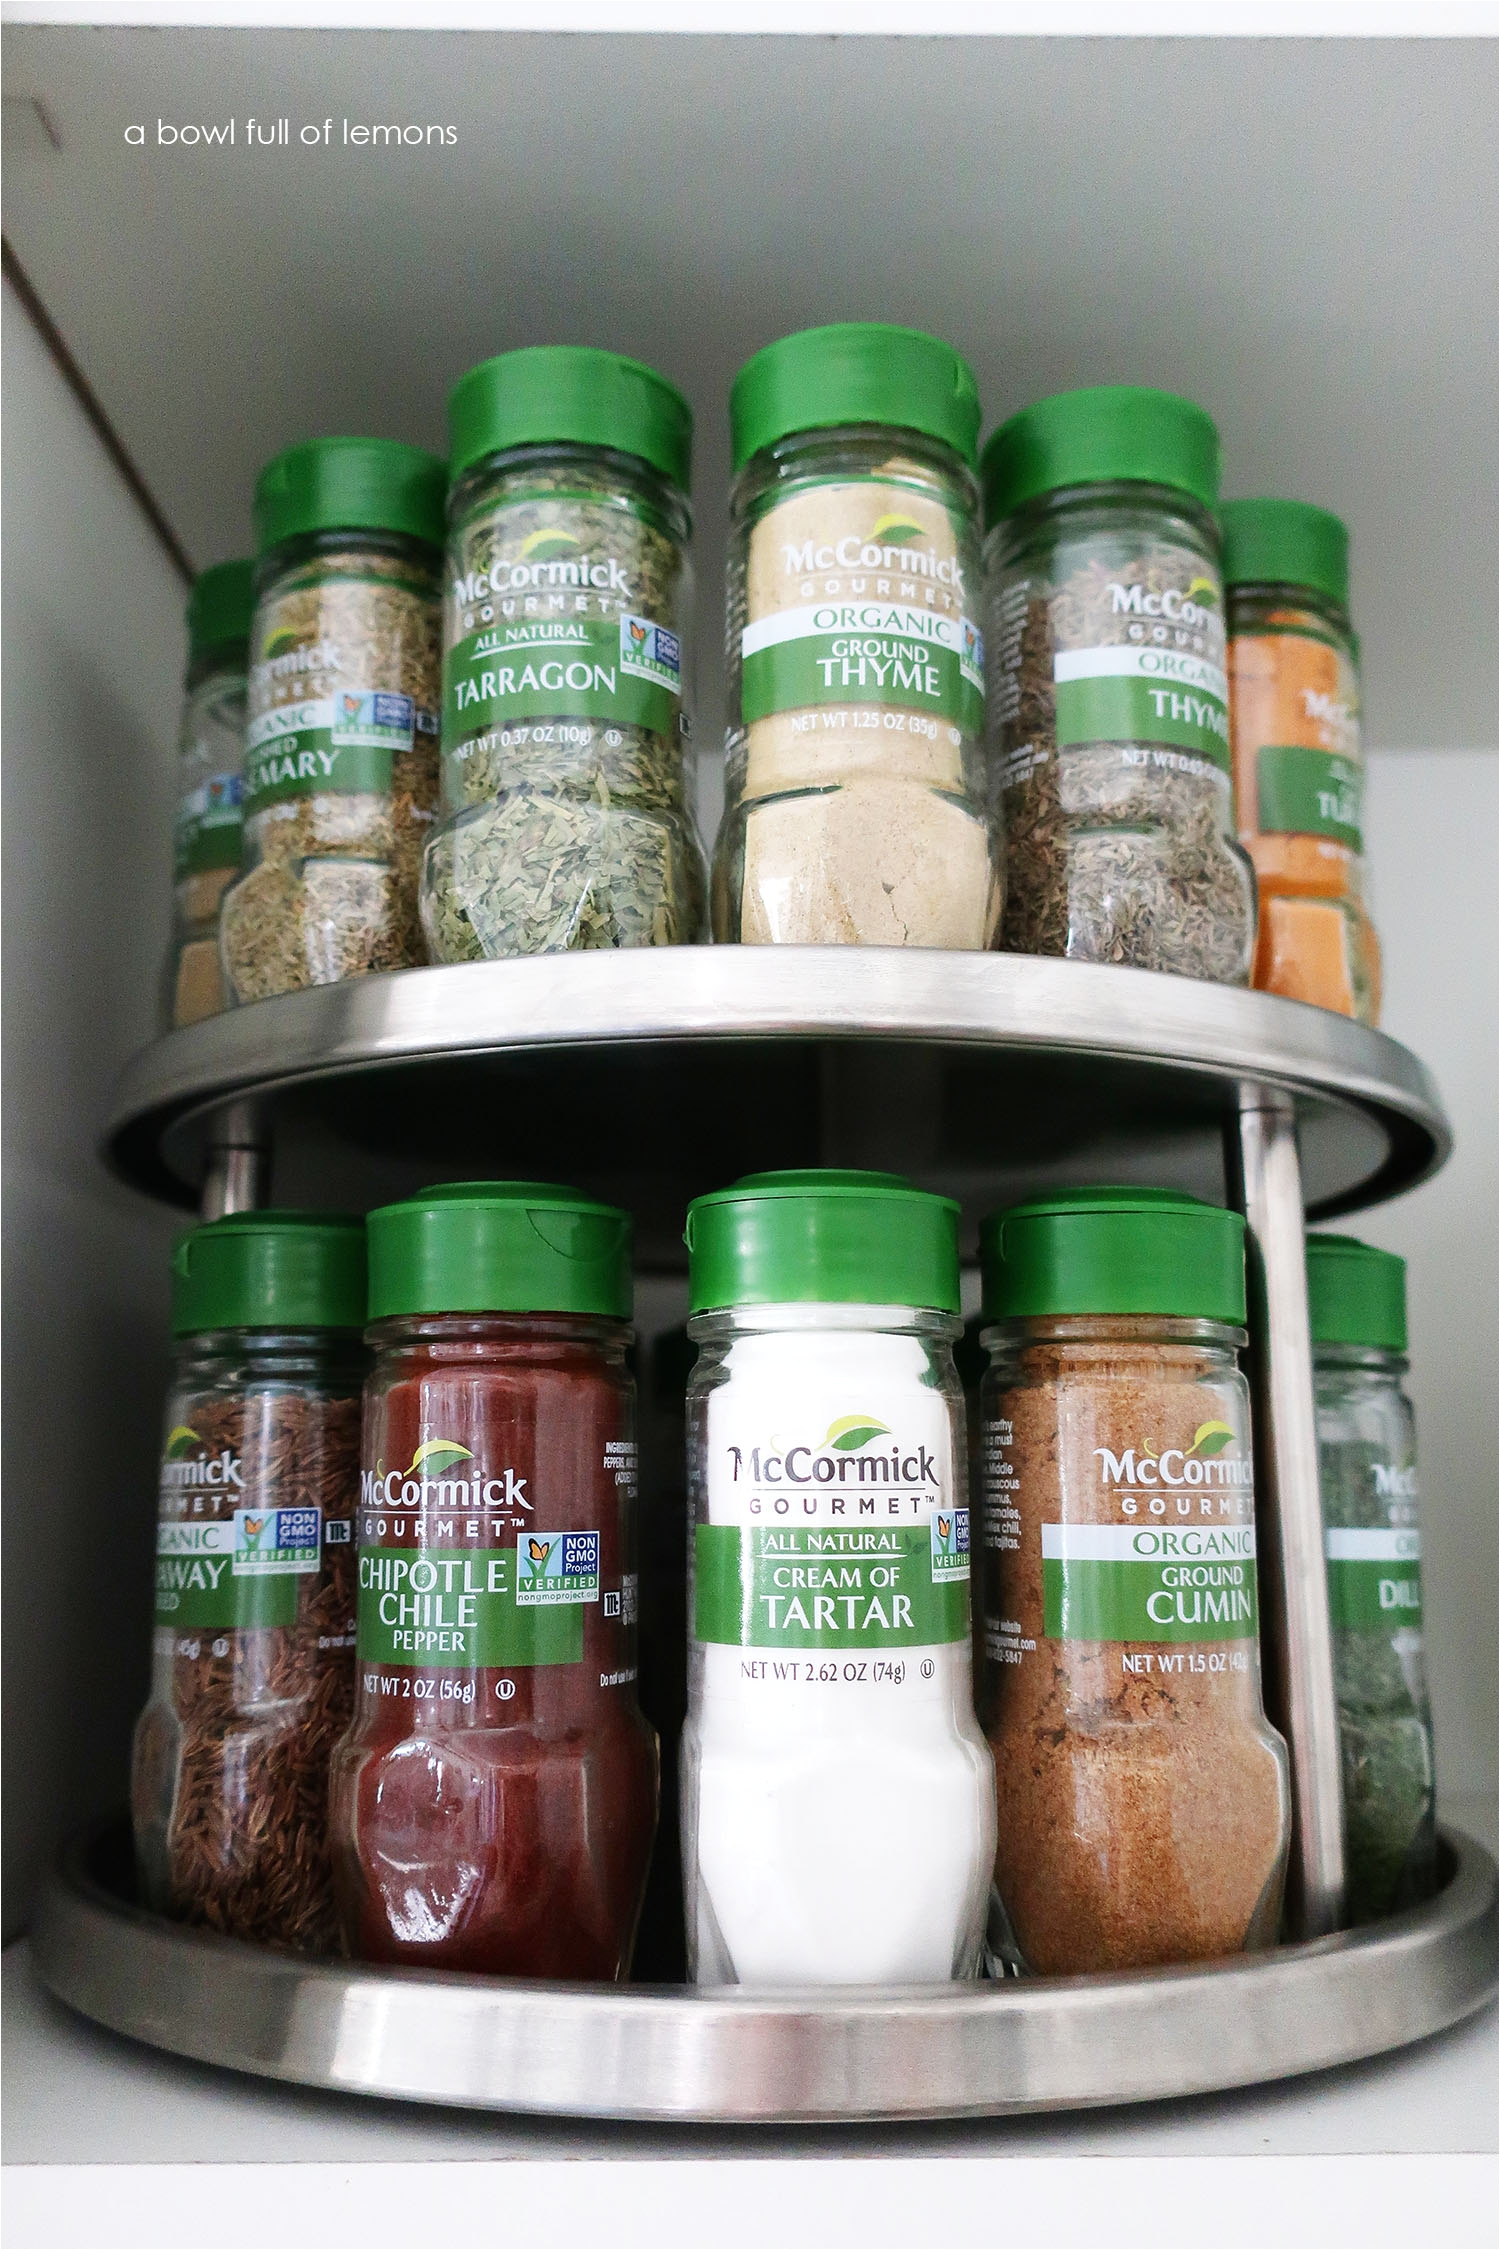 my personal favorites and most frequently used spices are onion powder and garlic salt i keep these front and center so they are easily accessible